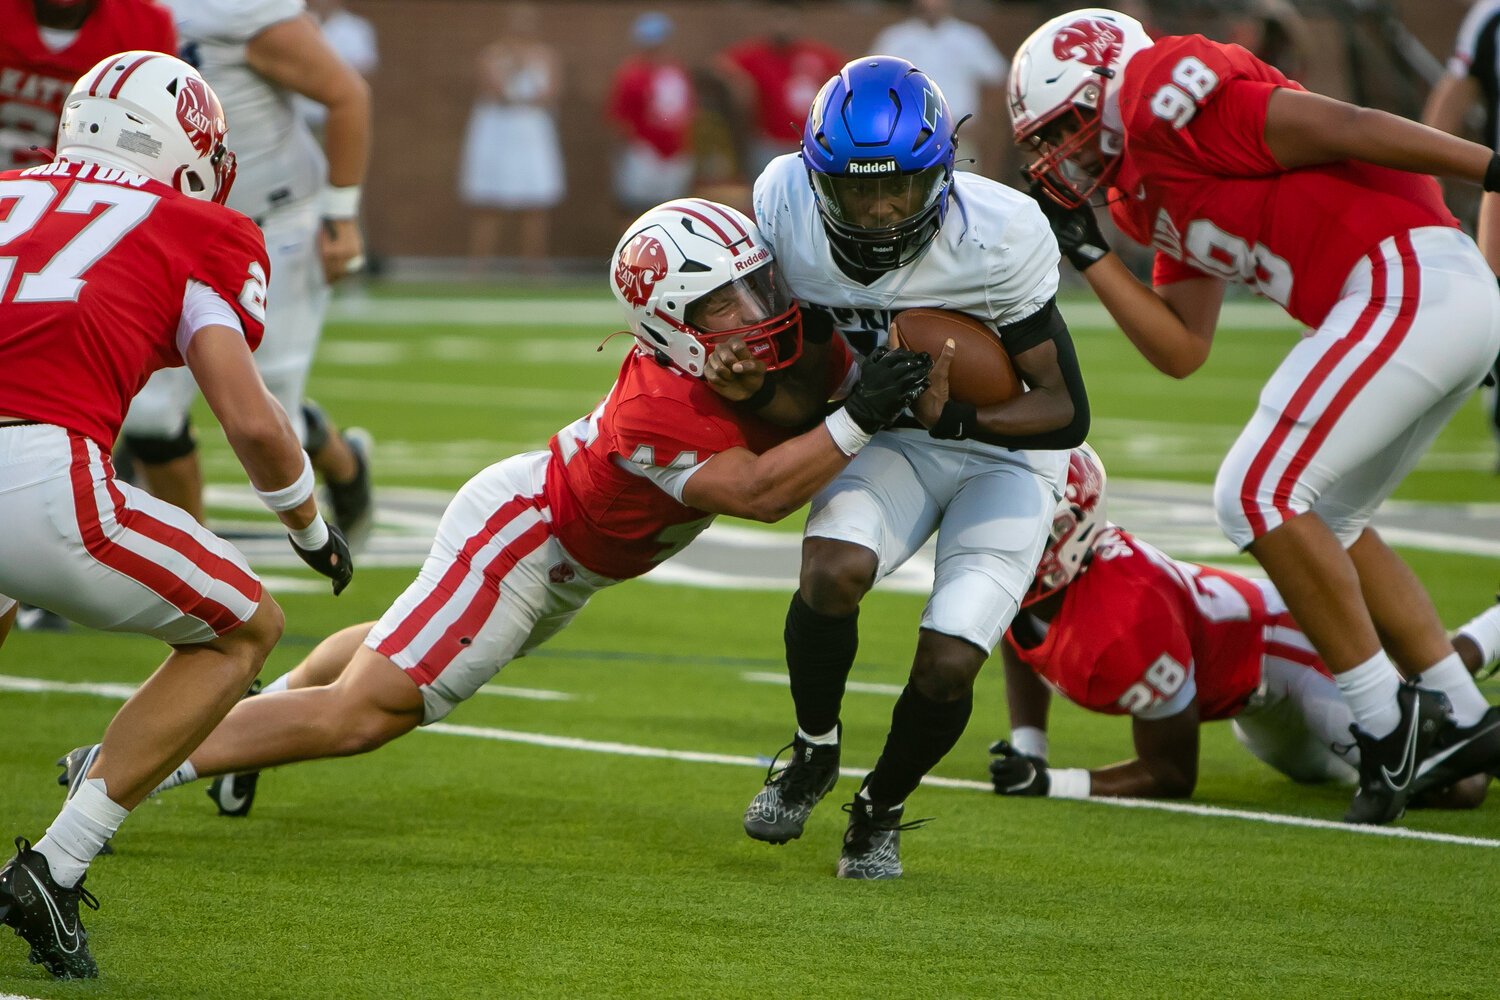 Connor Johnsey takes down a clear Springs player during Saturday's game between Katy and Clear Springs at Rhodes Stadium.